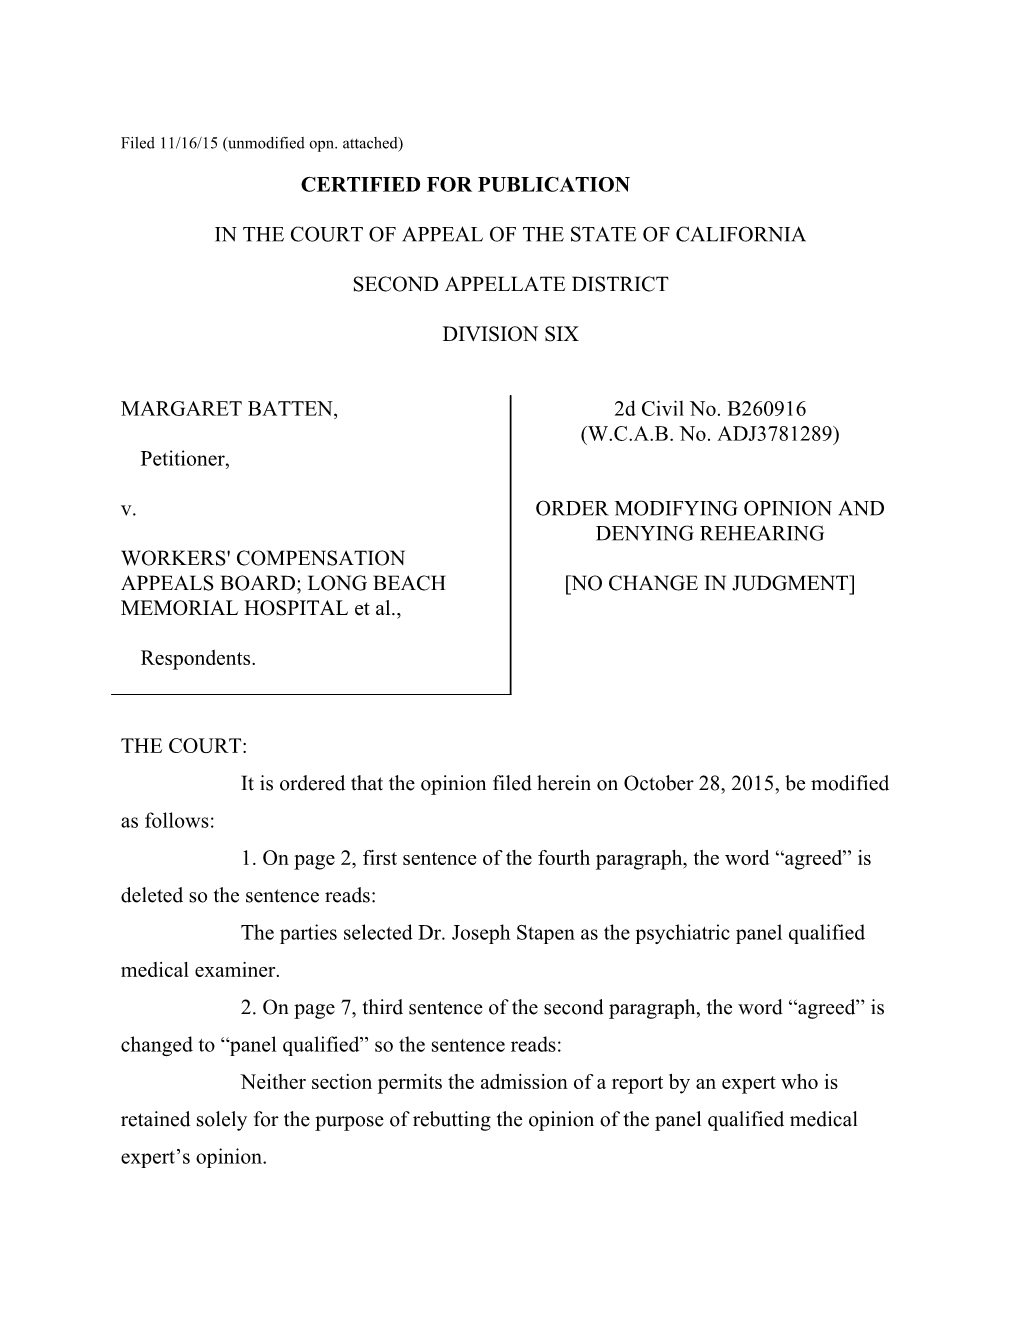 Filed 11/16/15 (Unmodified Opn. Attached)